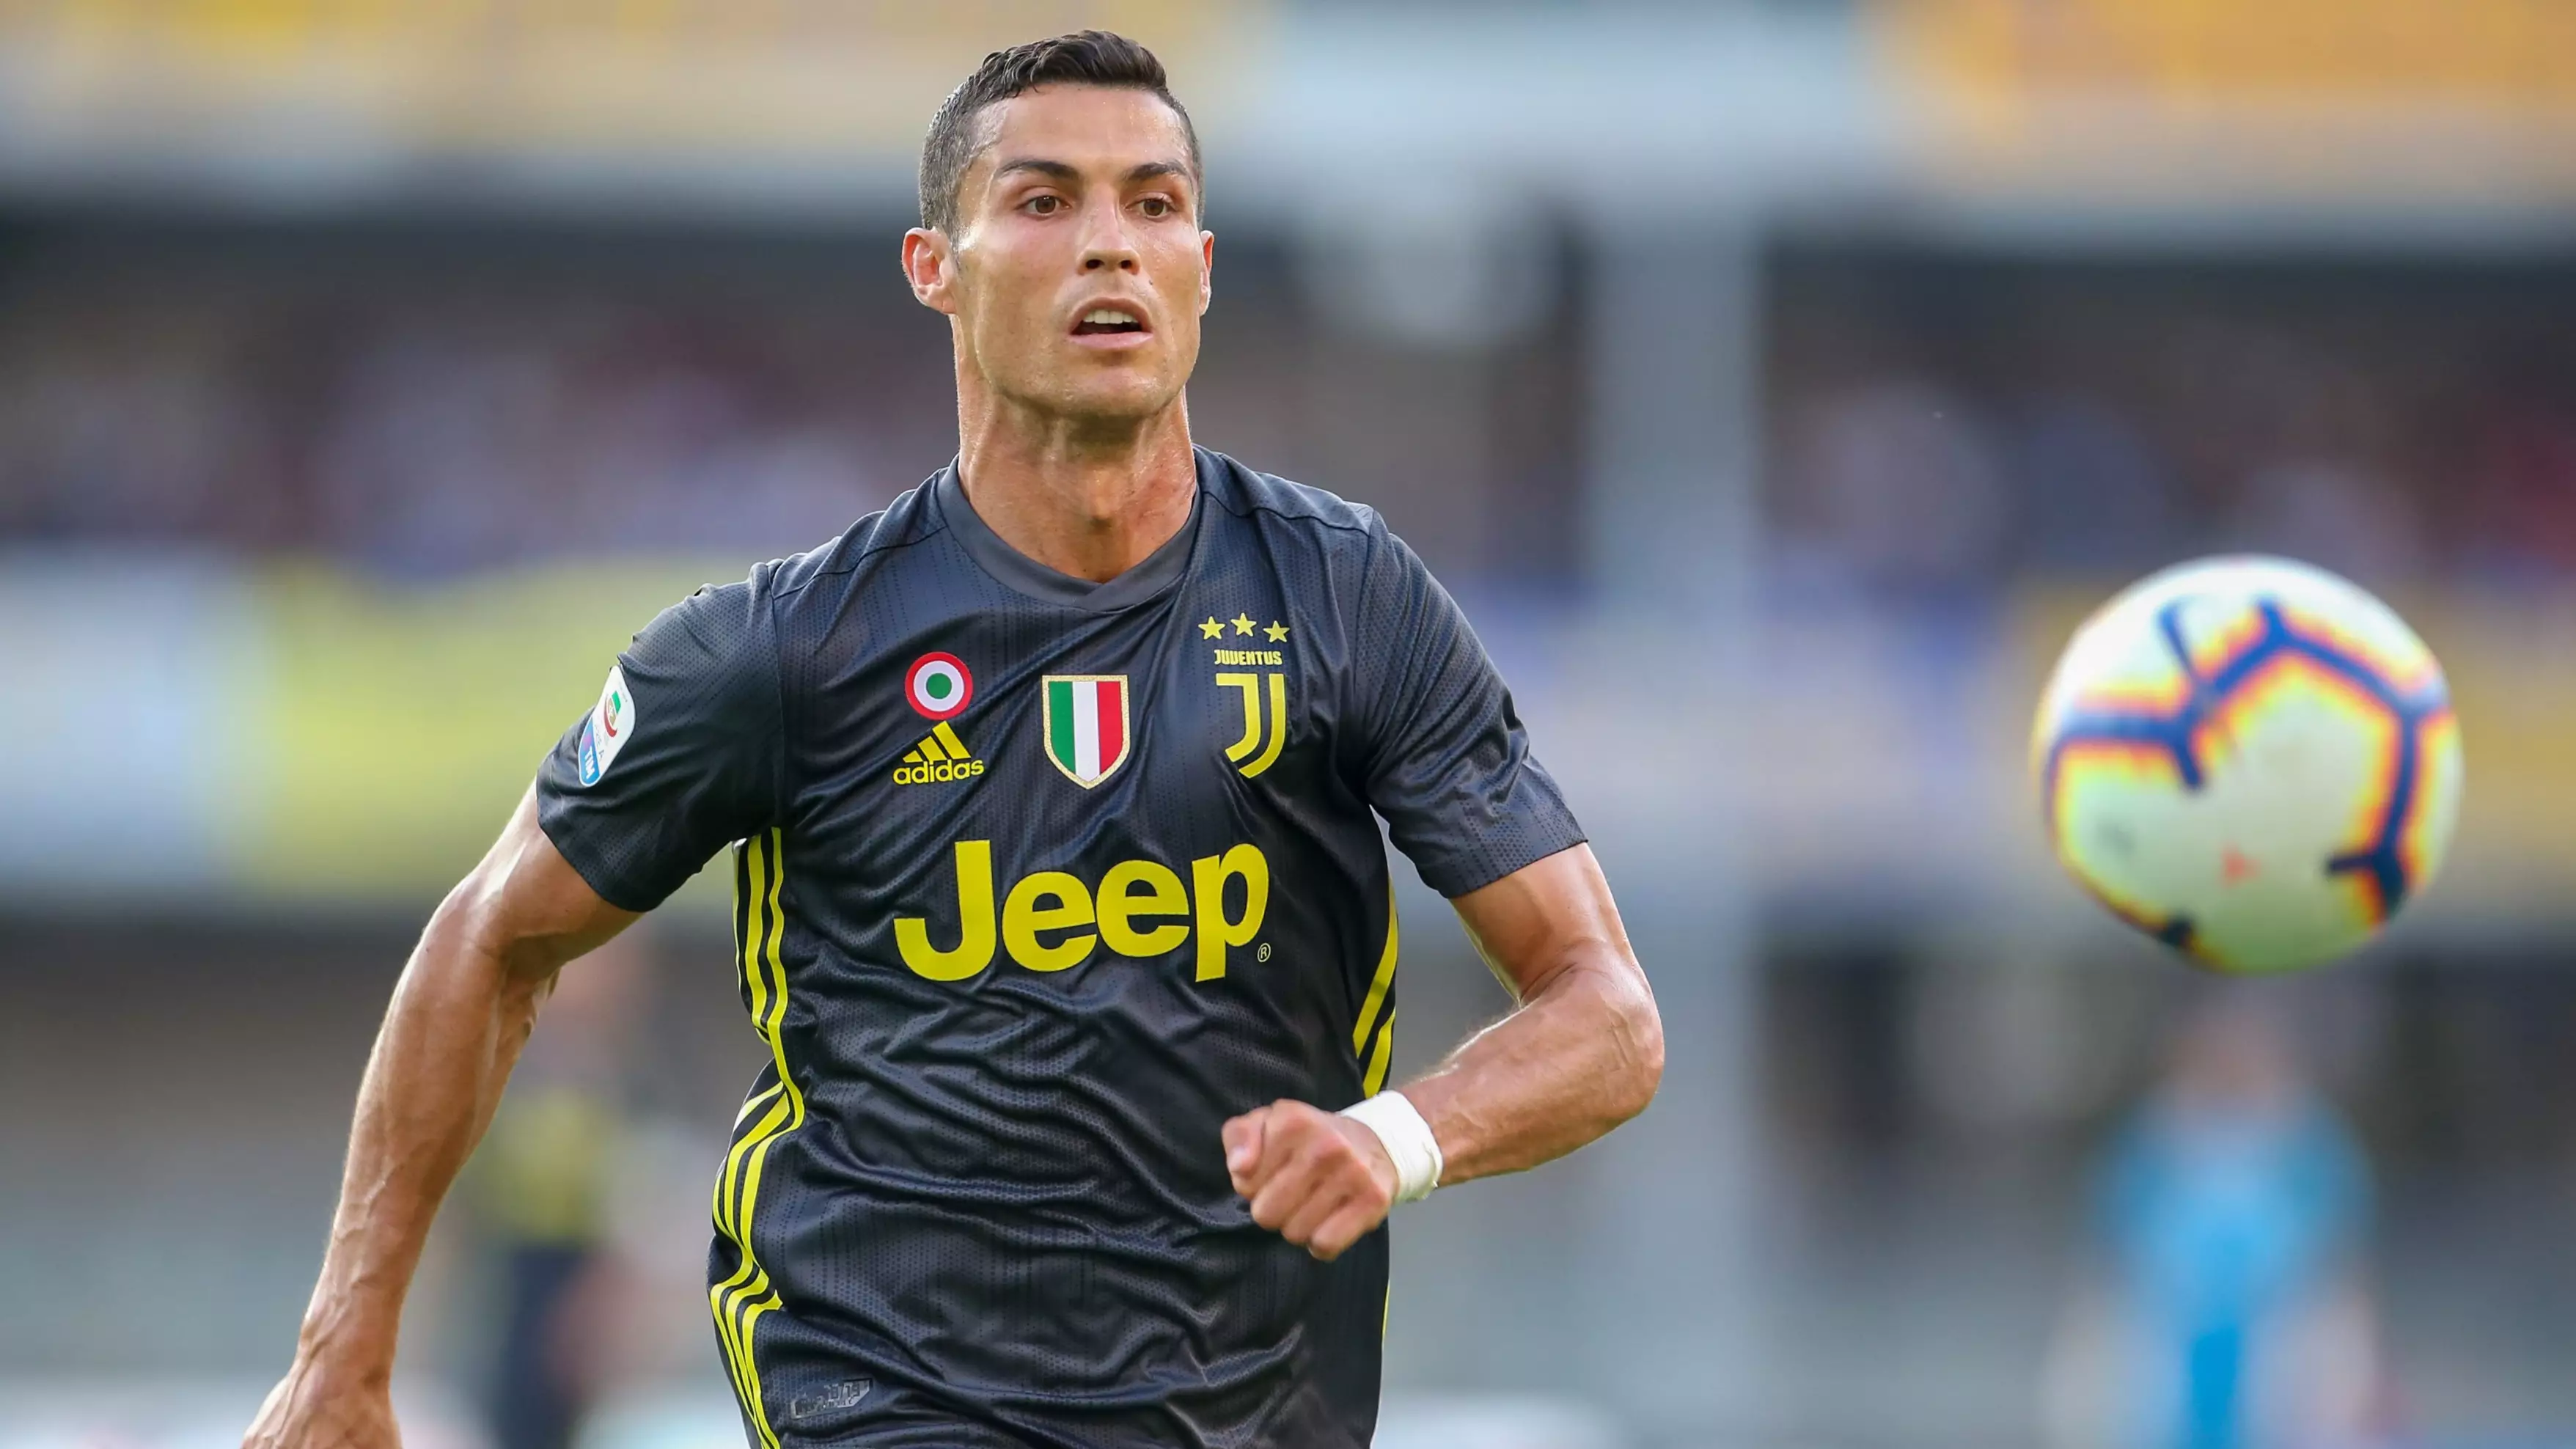 Cristiano Ronaldo's Juventus Debut Viewing Figures Prove What A Special Attraction He Is